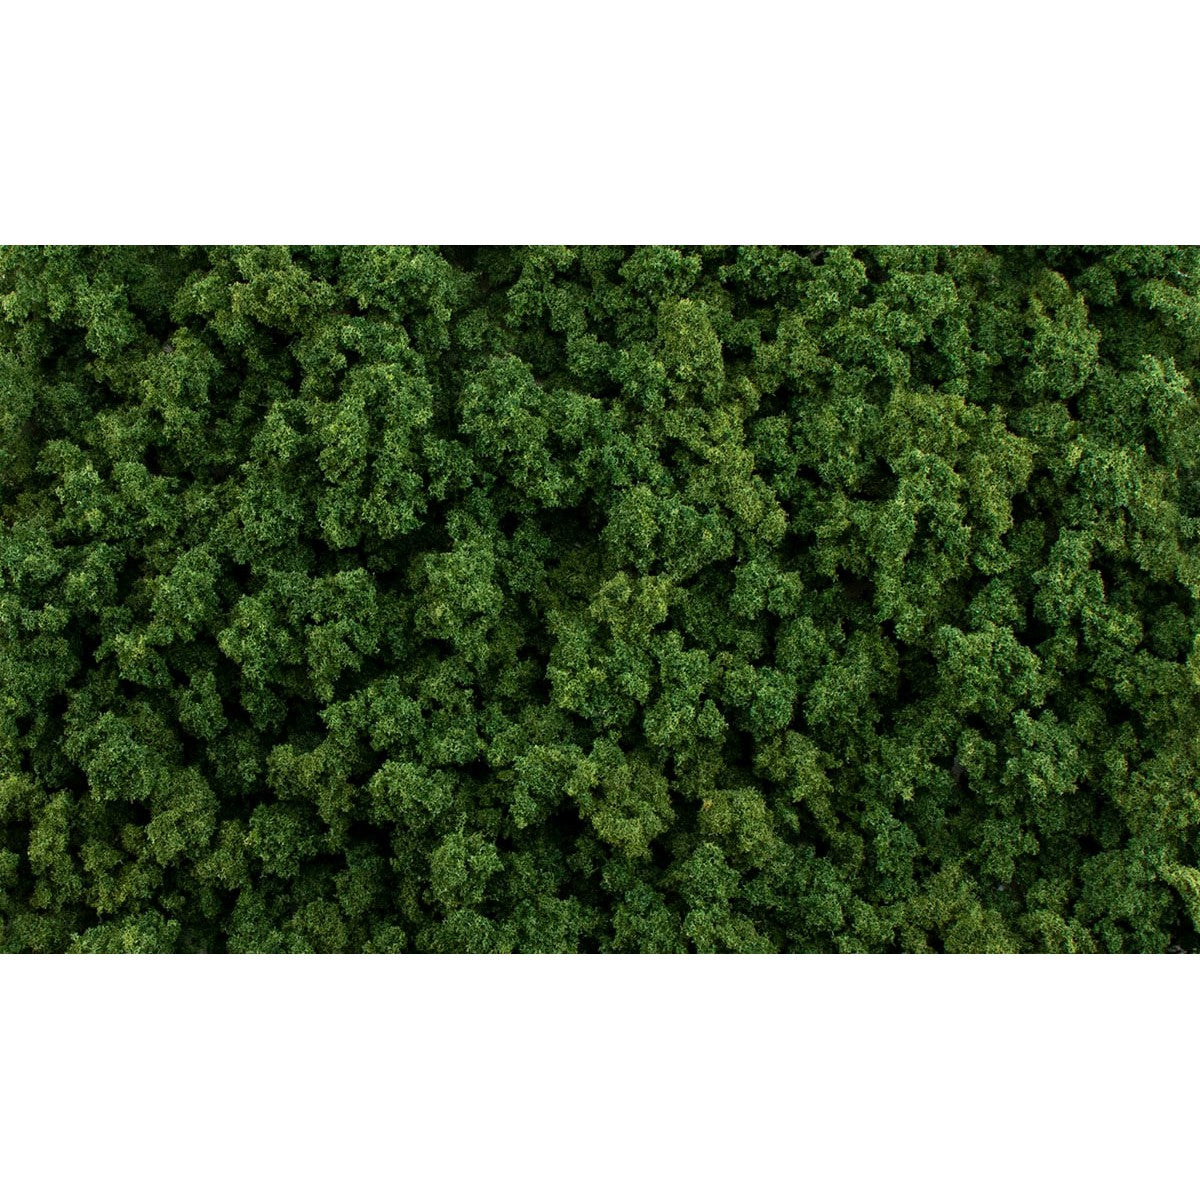 Medium Green Foliage Clumps - Medium Green Foliage Clumps make it easy to add bushes, shrubbery and trees to your terrain feature, miniature base or gaming board